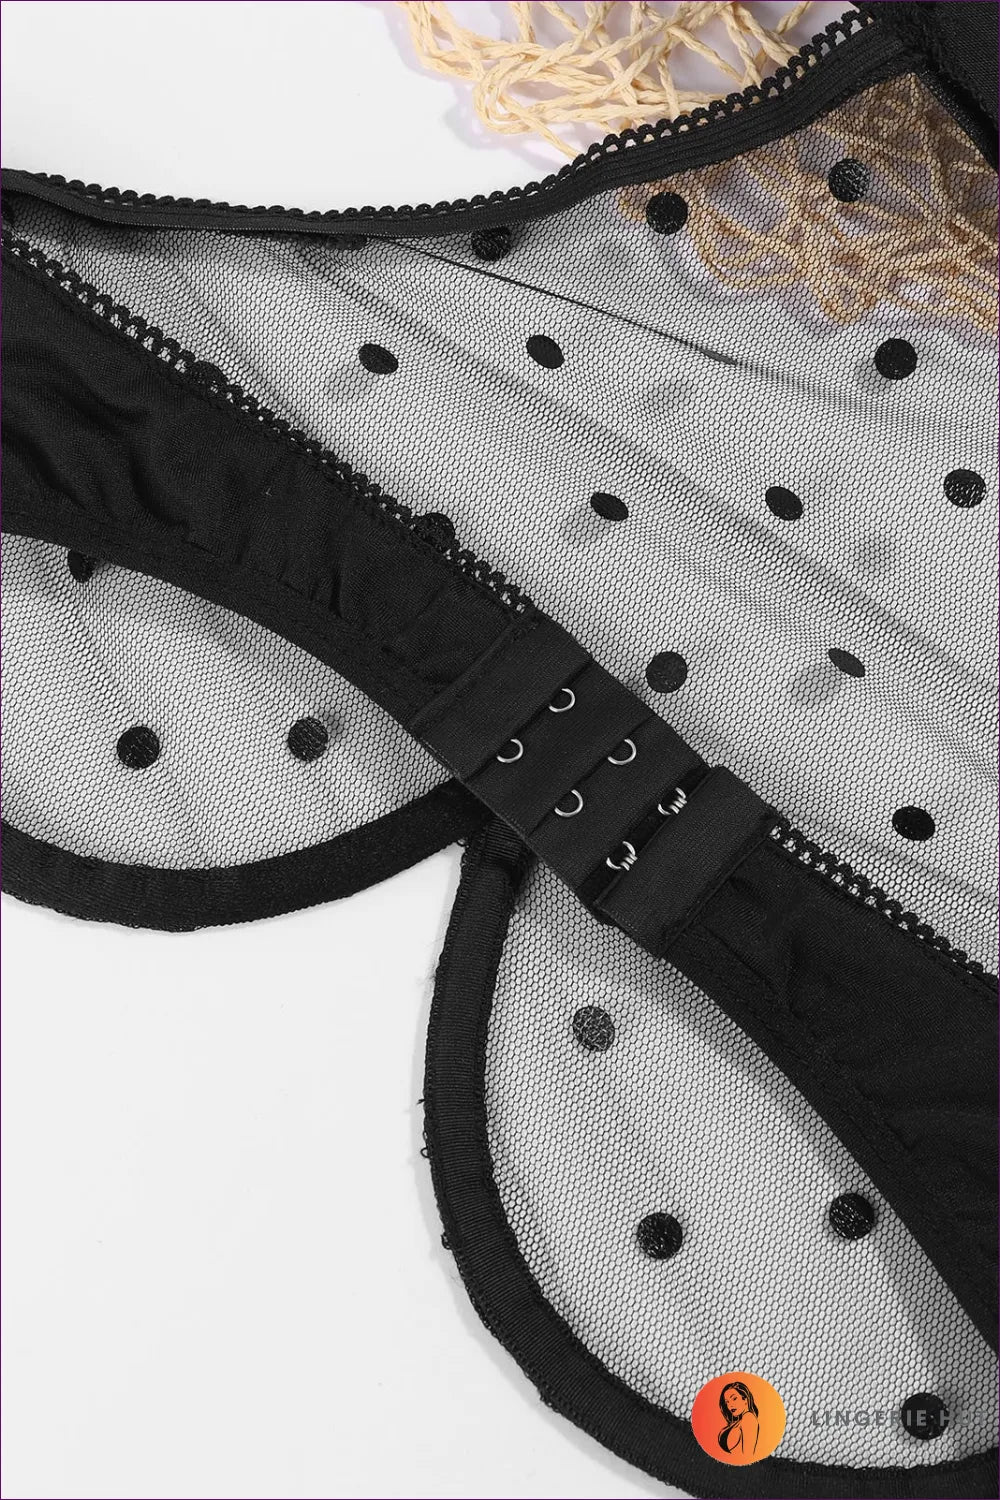 Discover The Charm Of Our Polka Dot Mesh Underwire Bra Set. a High-waist Panty And Supportive Bra Blend For